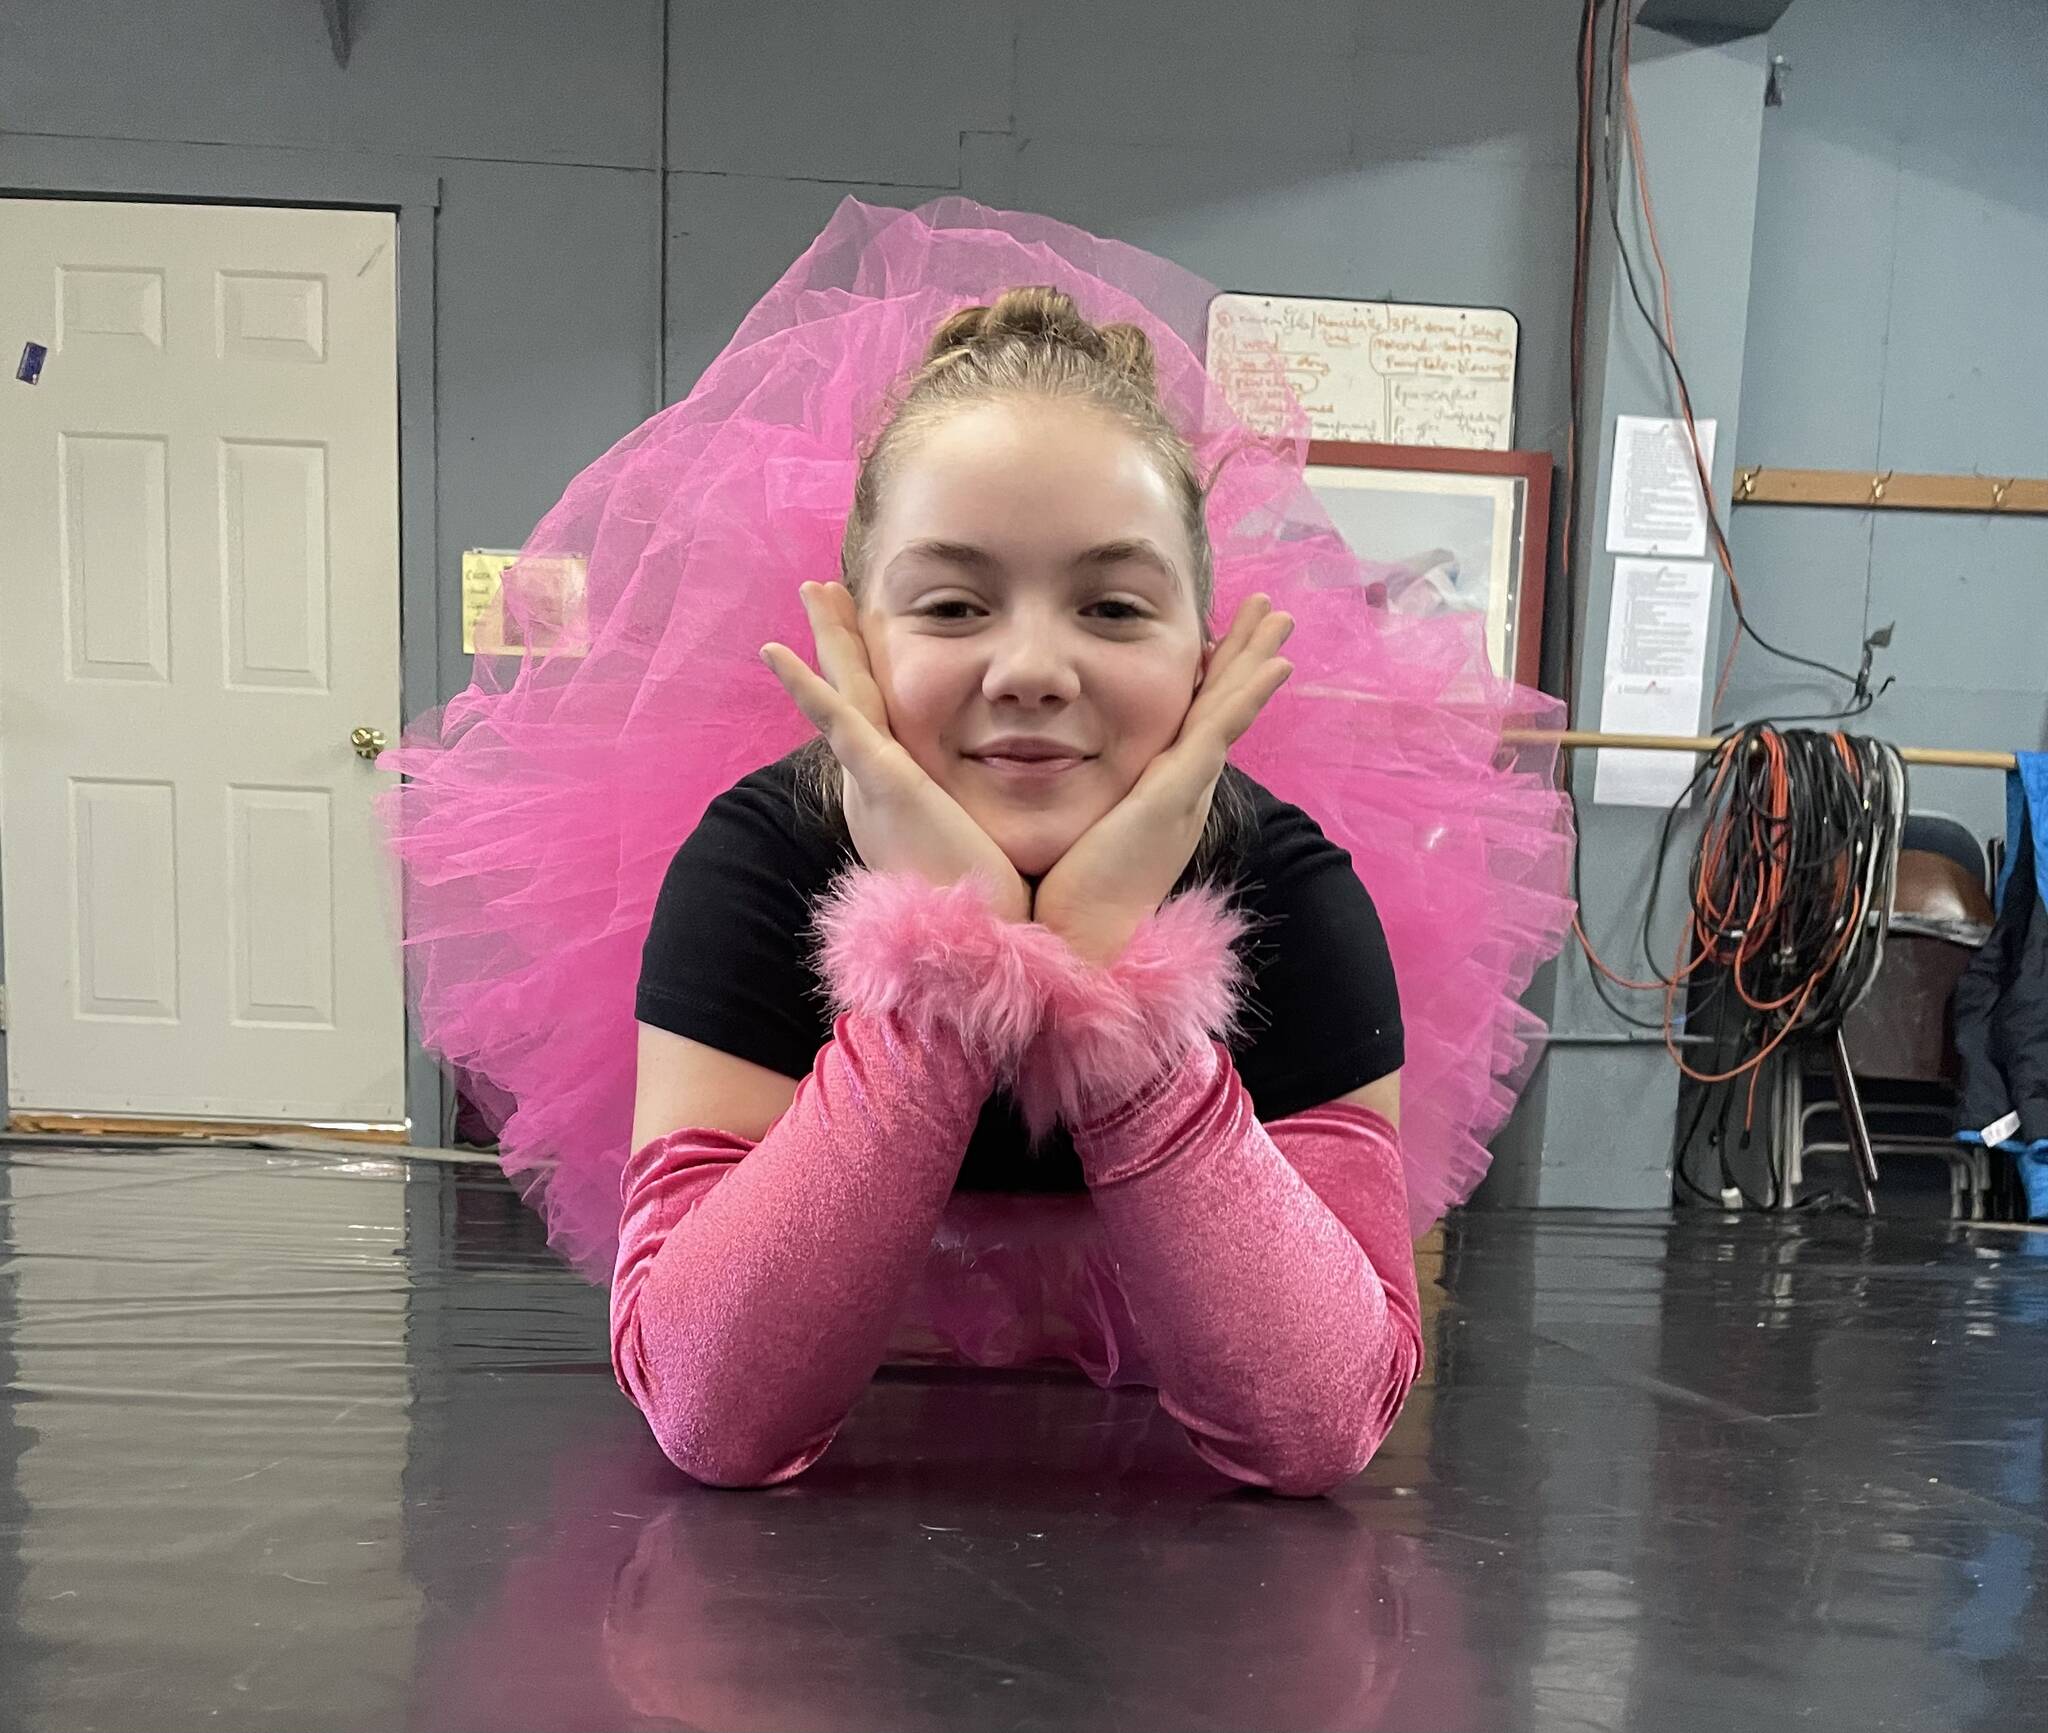 Piper Arno poses in rehearsal as an idiosyncratic flamingo in the Art Barn in Homer, Alaska. Photo provided by Breezy Berryman.